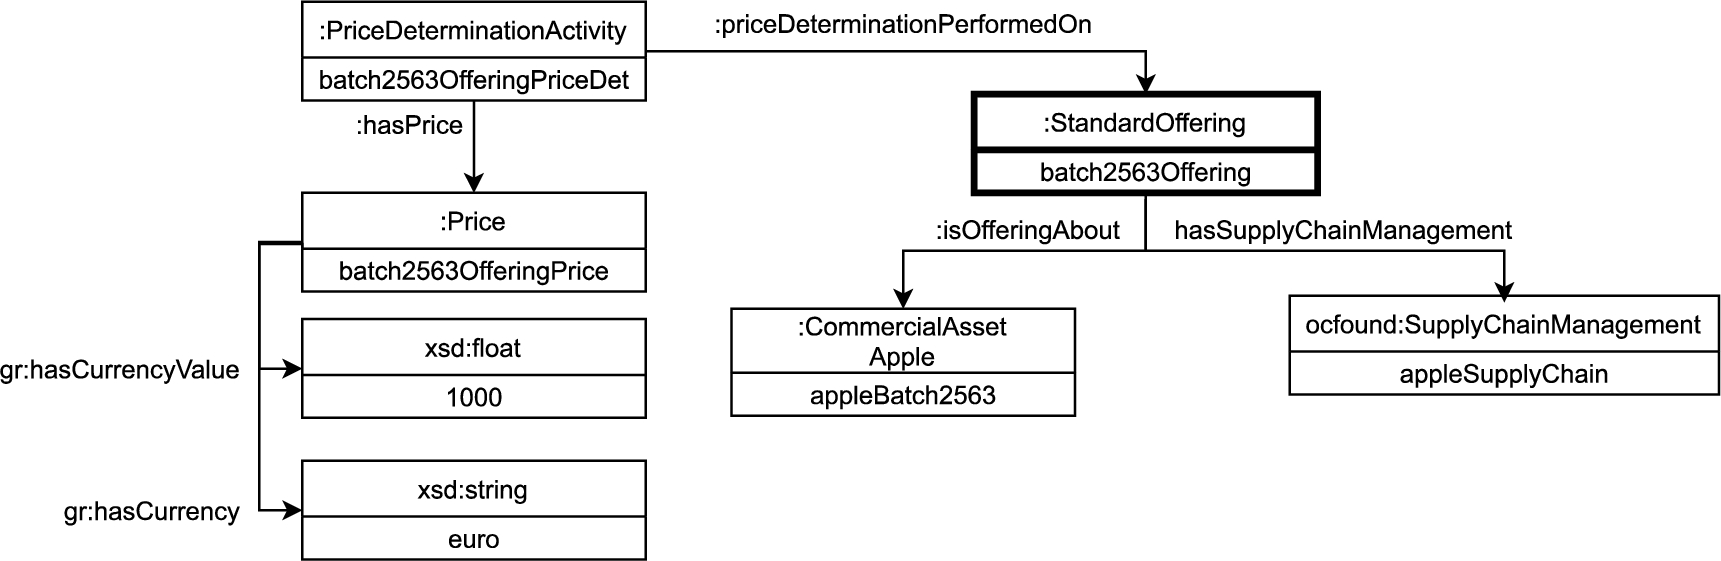 UML diagram exemplifying the full details of an offering for apple batch 2563 in the OC-Commerce ontology.